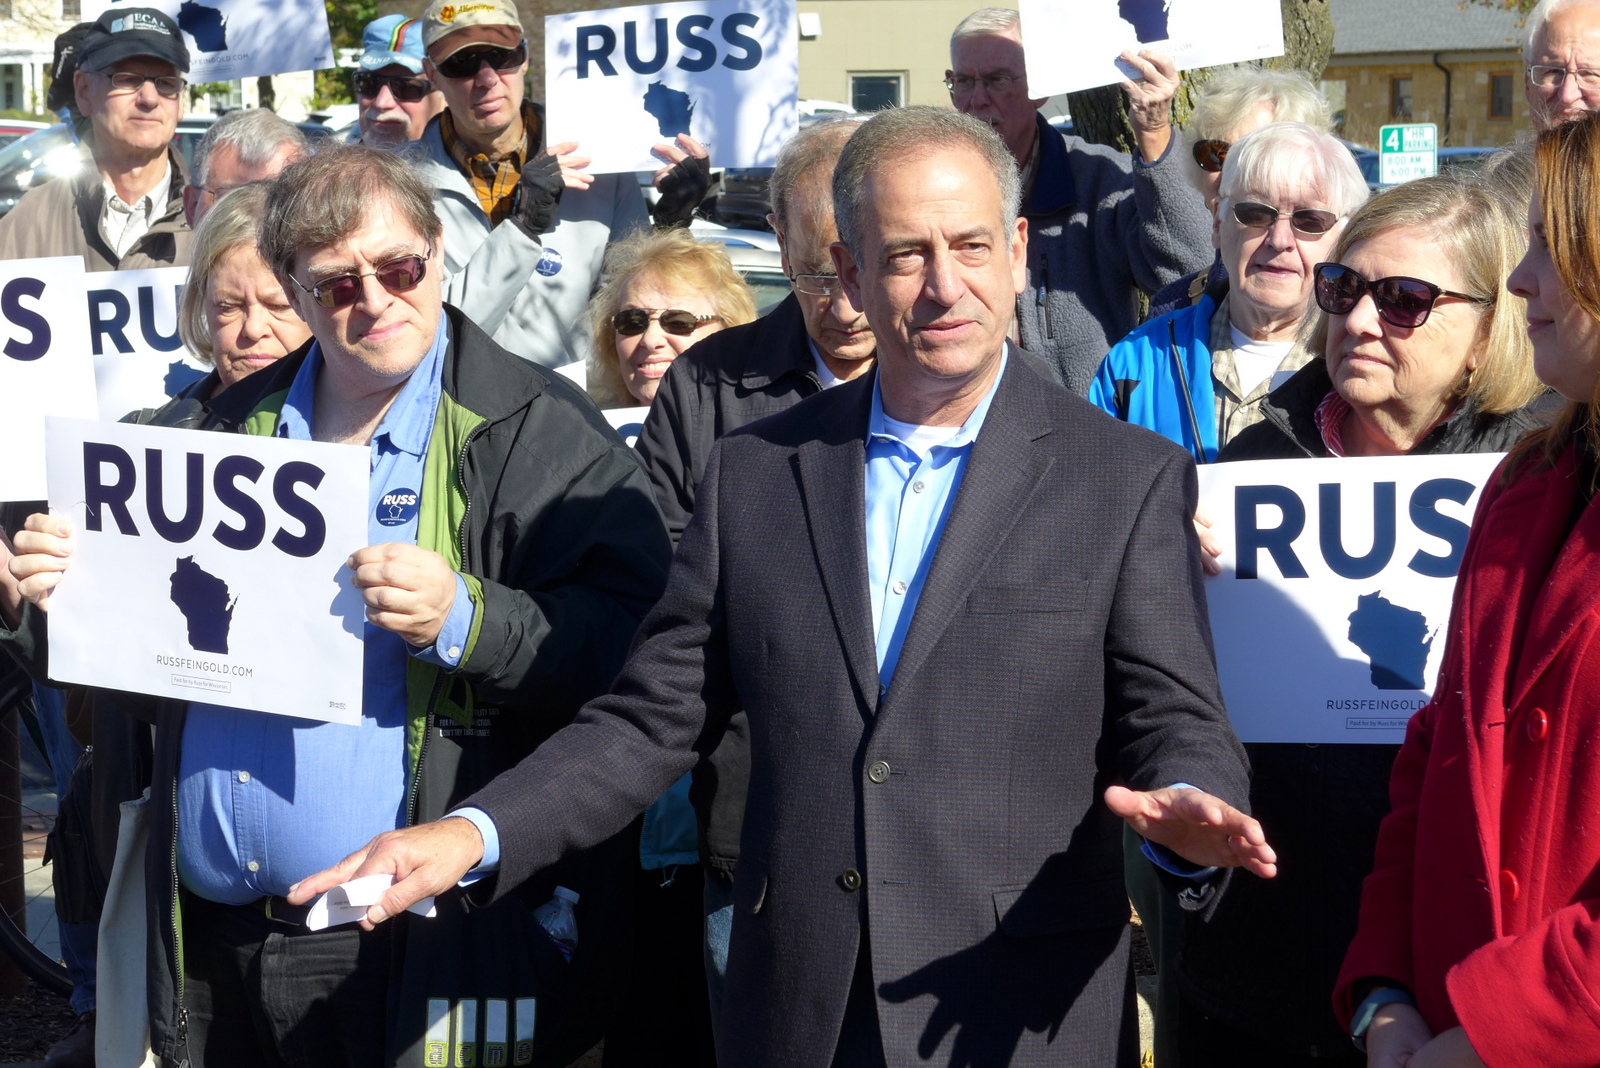 Russ Feingold with supporters